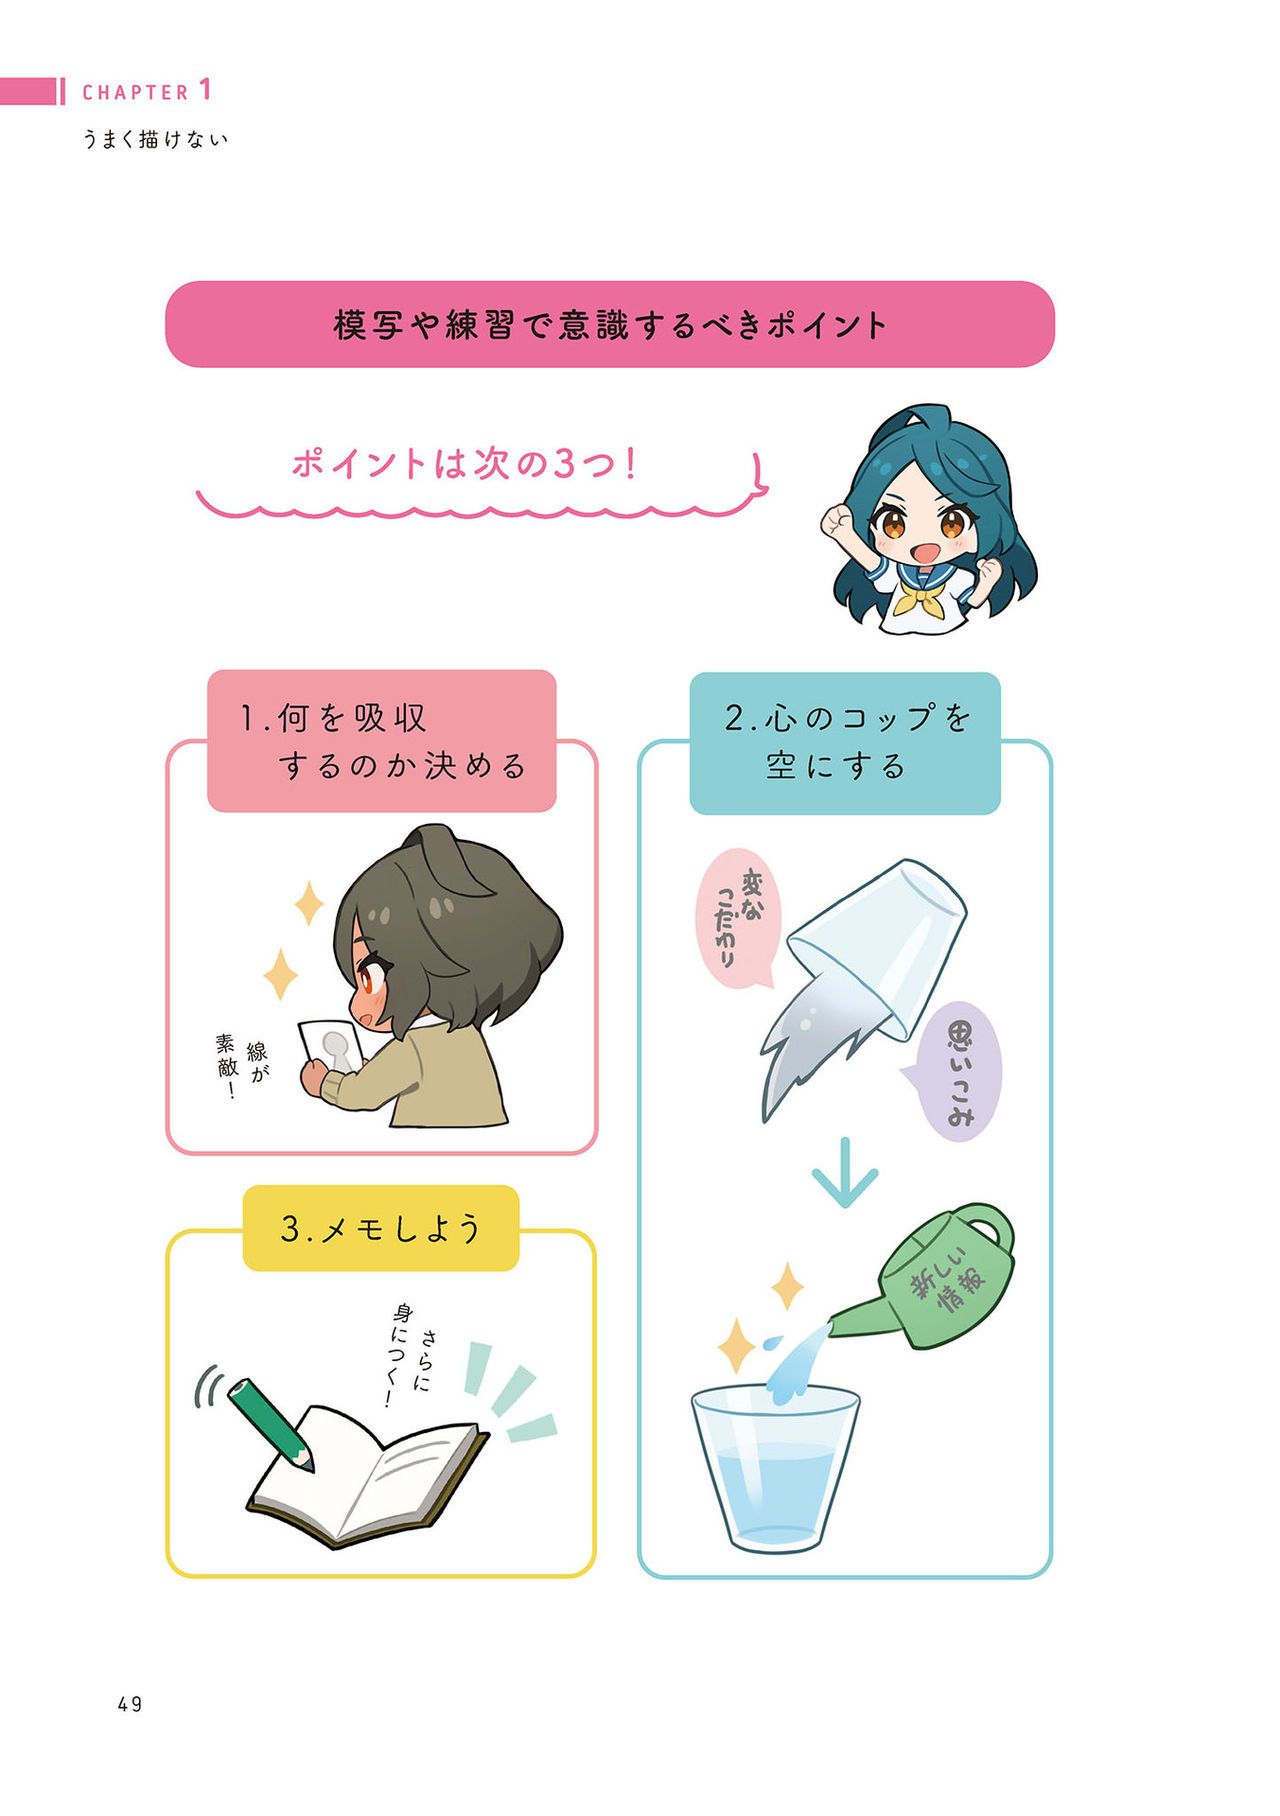 Prohibition of drawing well How to improve illustrations that are not smooth うまく描くの禁止 ツラくないイラスト上達法 50